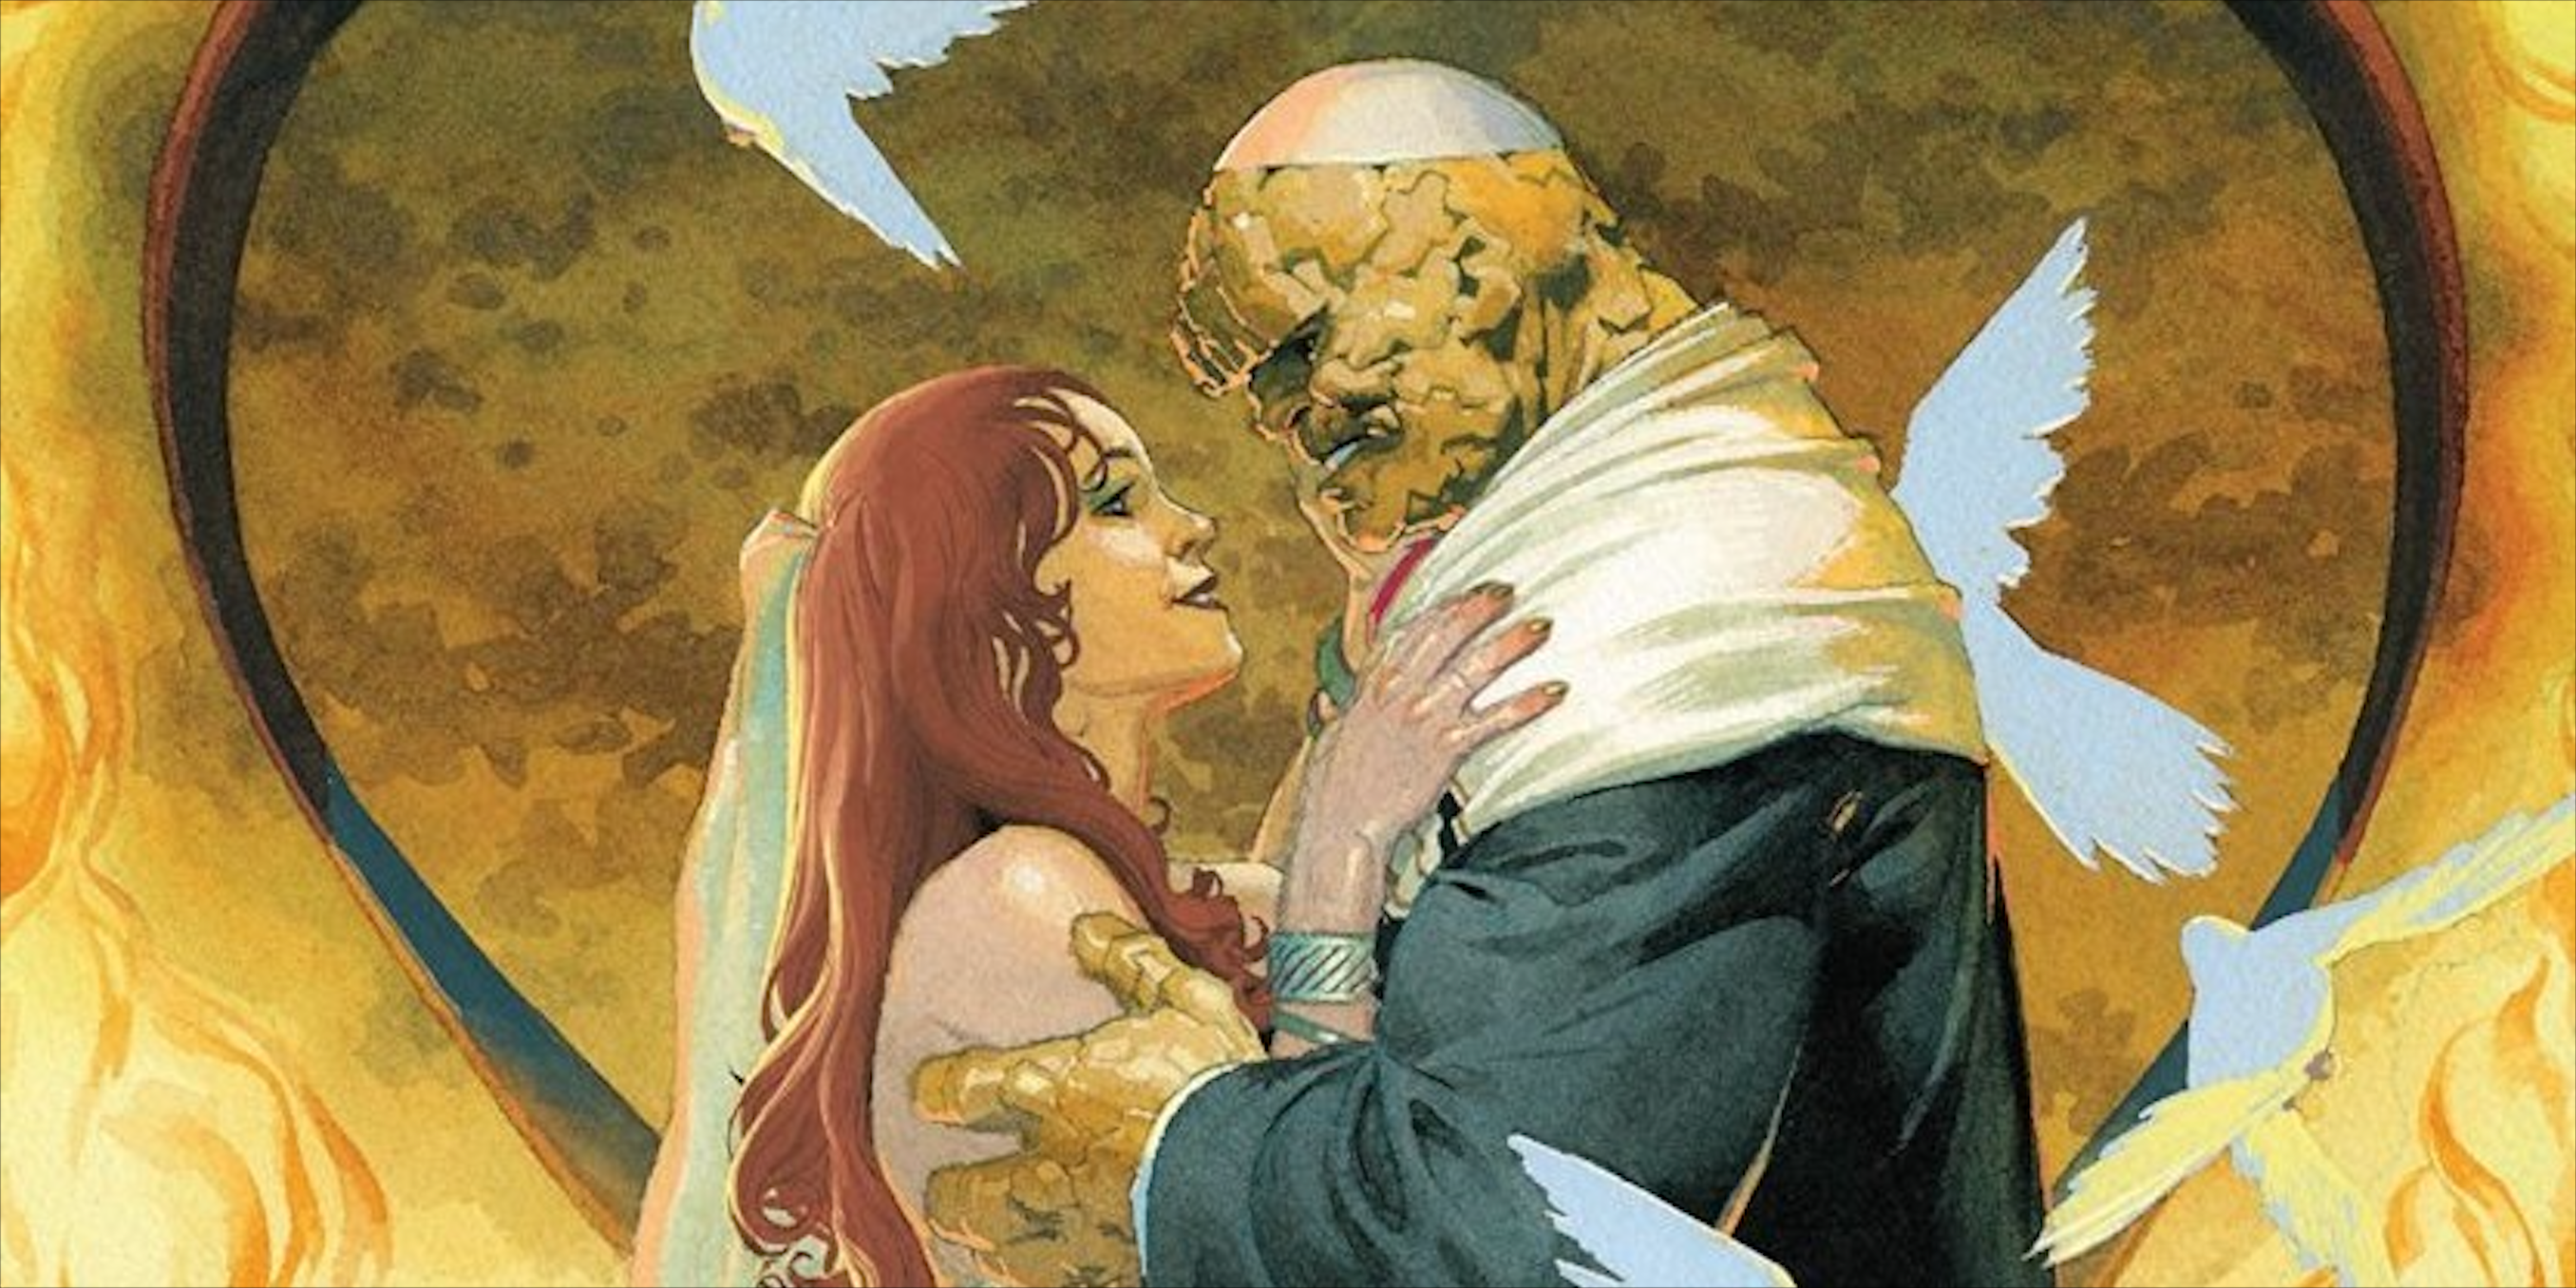 Ben Grimm the Thing marries Alicia Masters